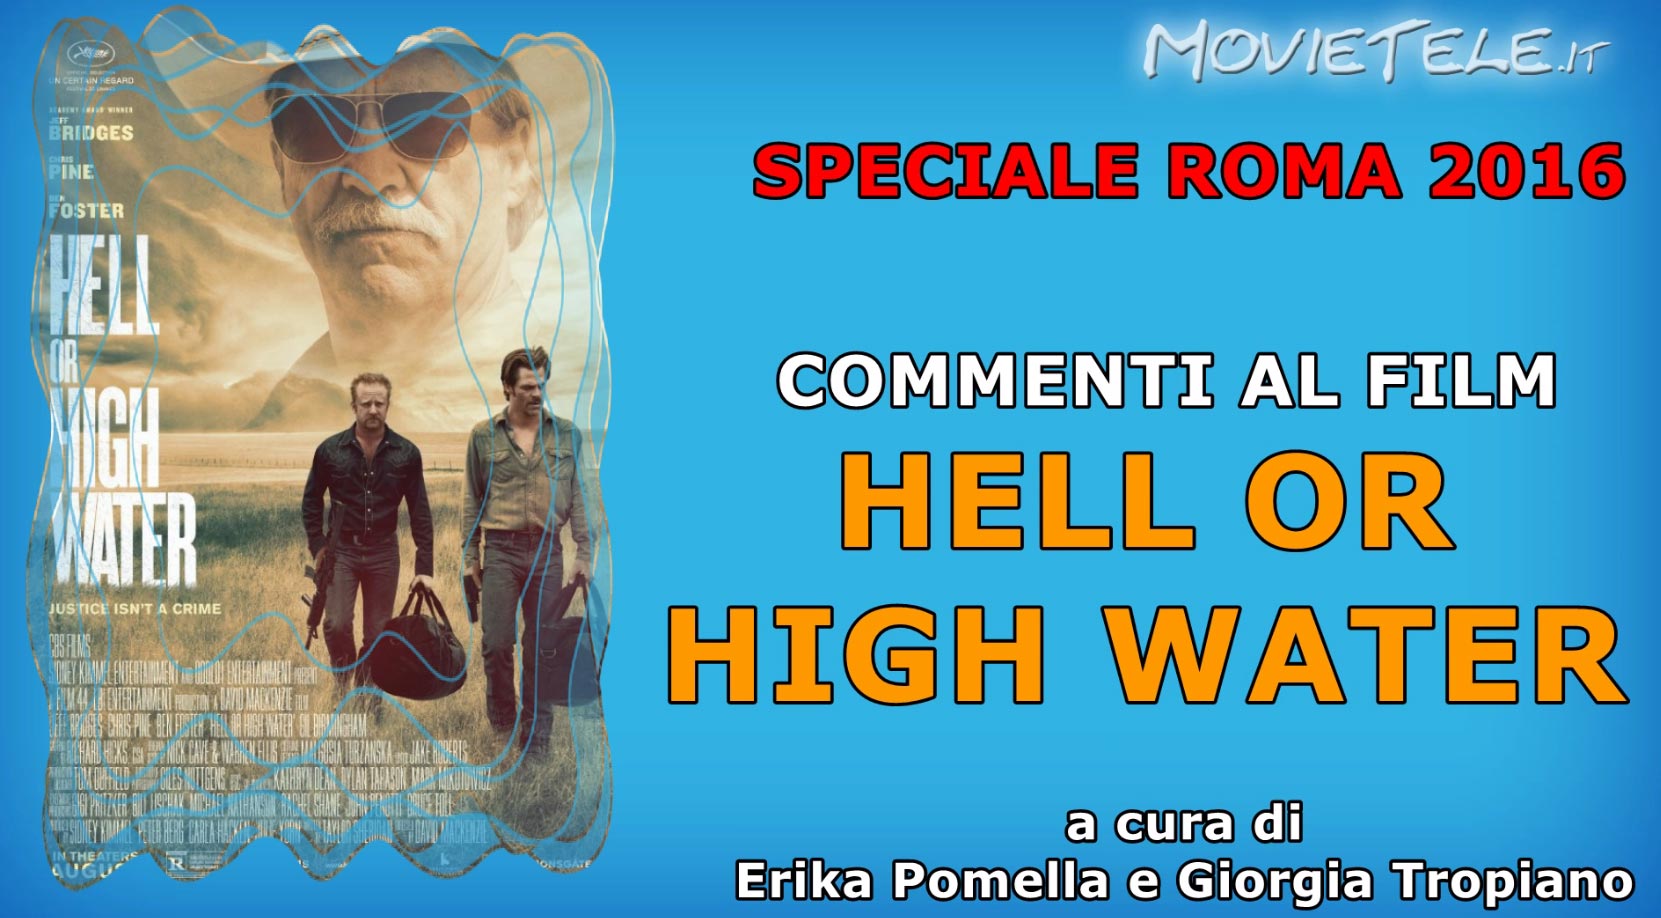 Roma 2016: Hell or High Water, commento al film